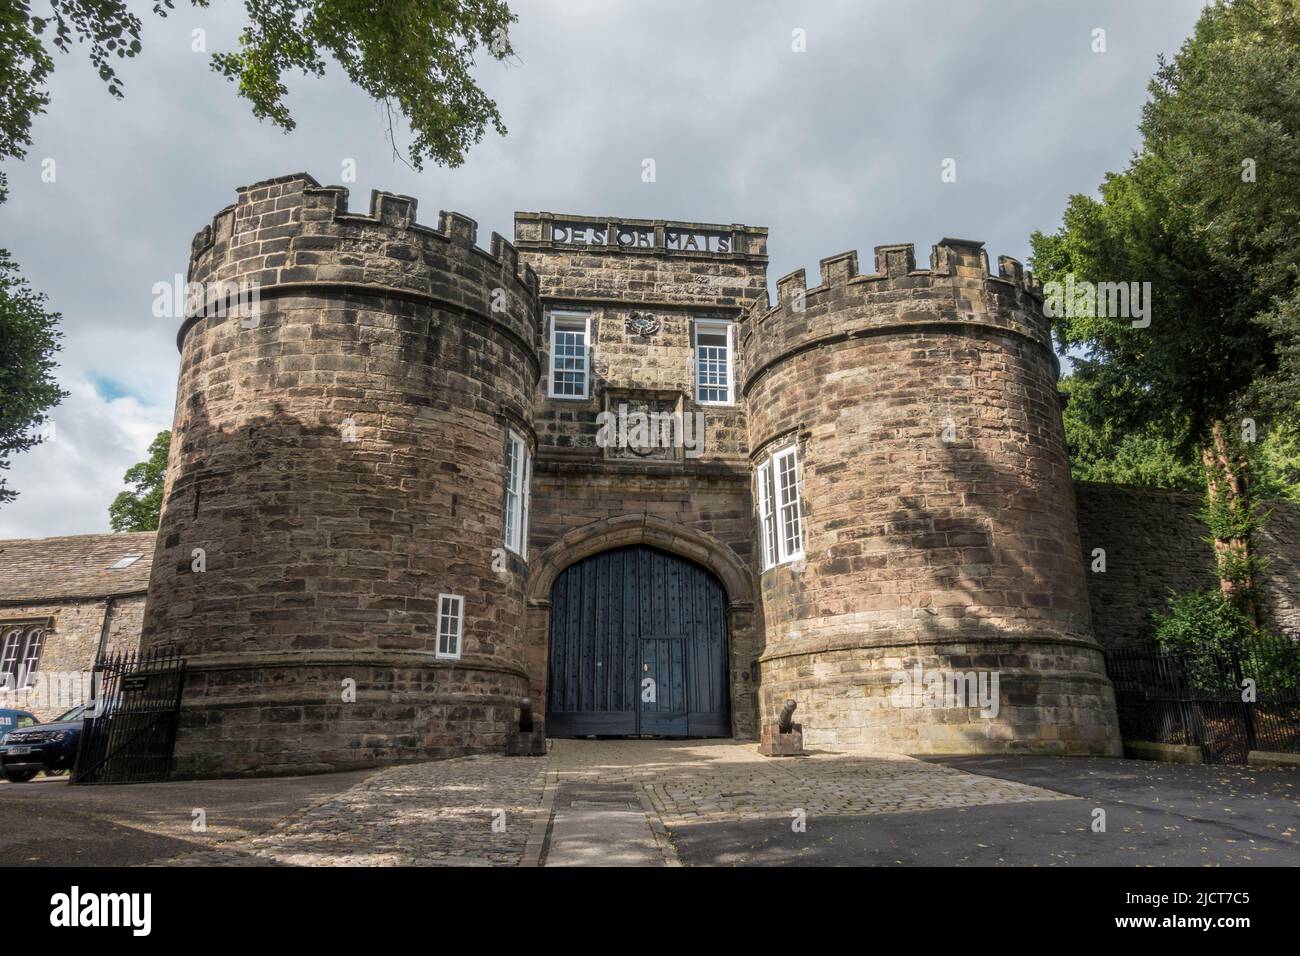 Skipton Castle gatehouse, built in 1090 by Robert de Romille, in the market town of Skipton, North Yorkshire, UK. Stock Photo